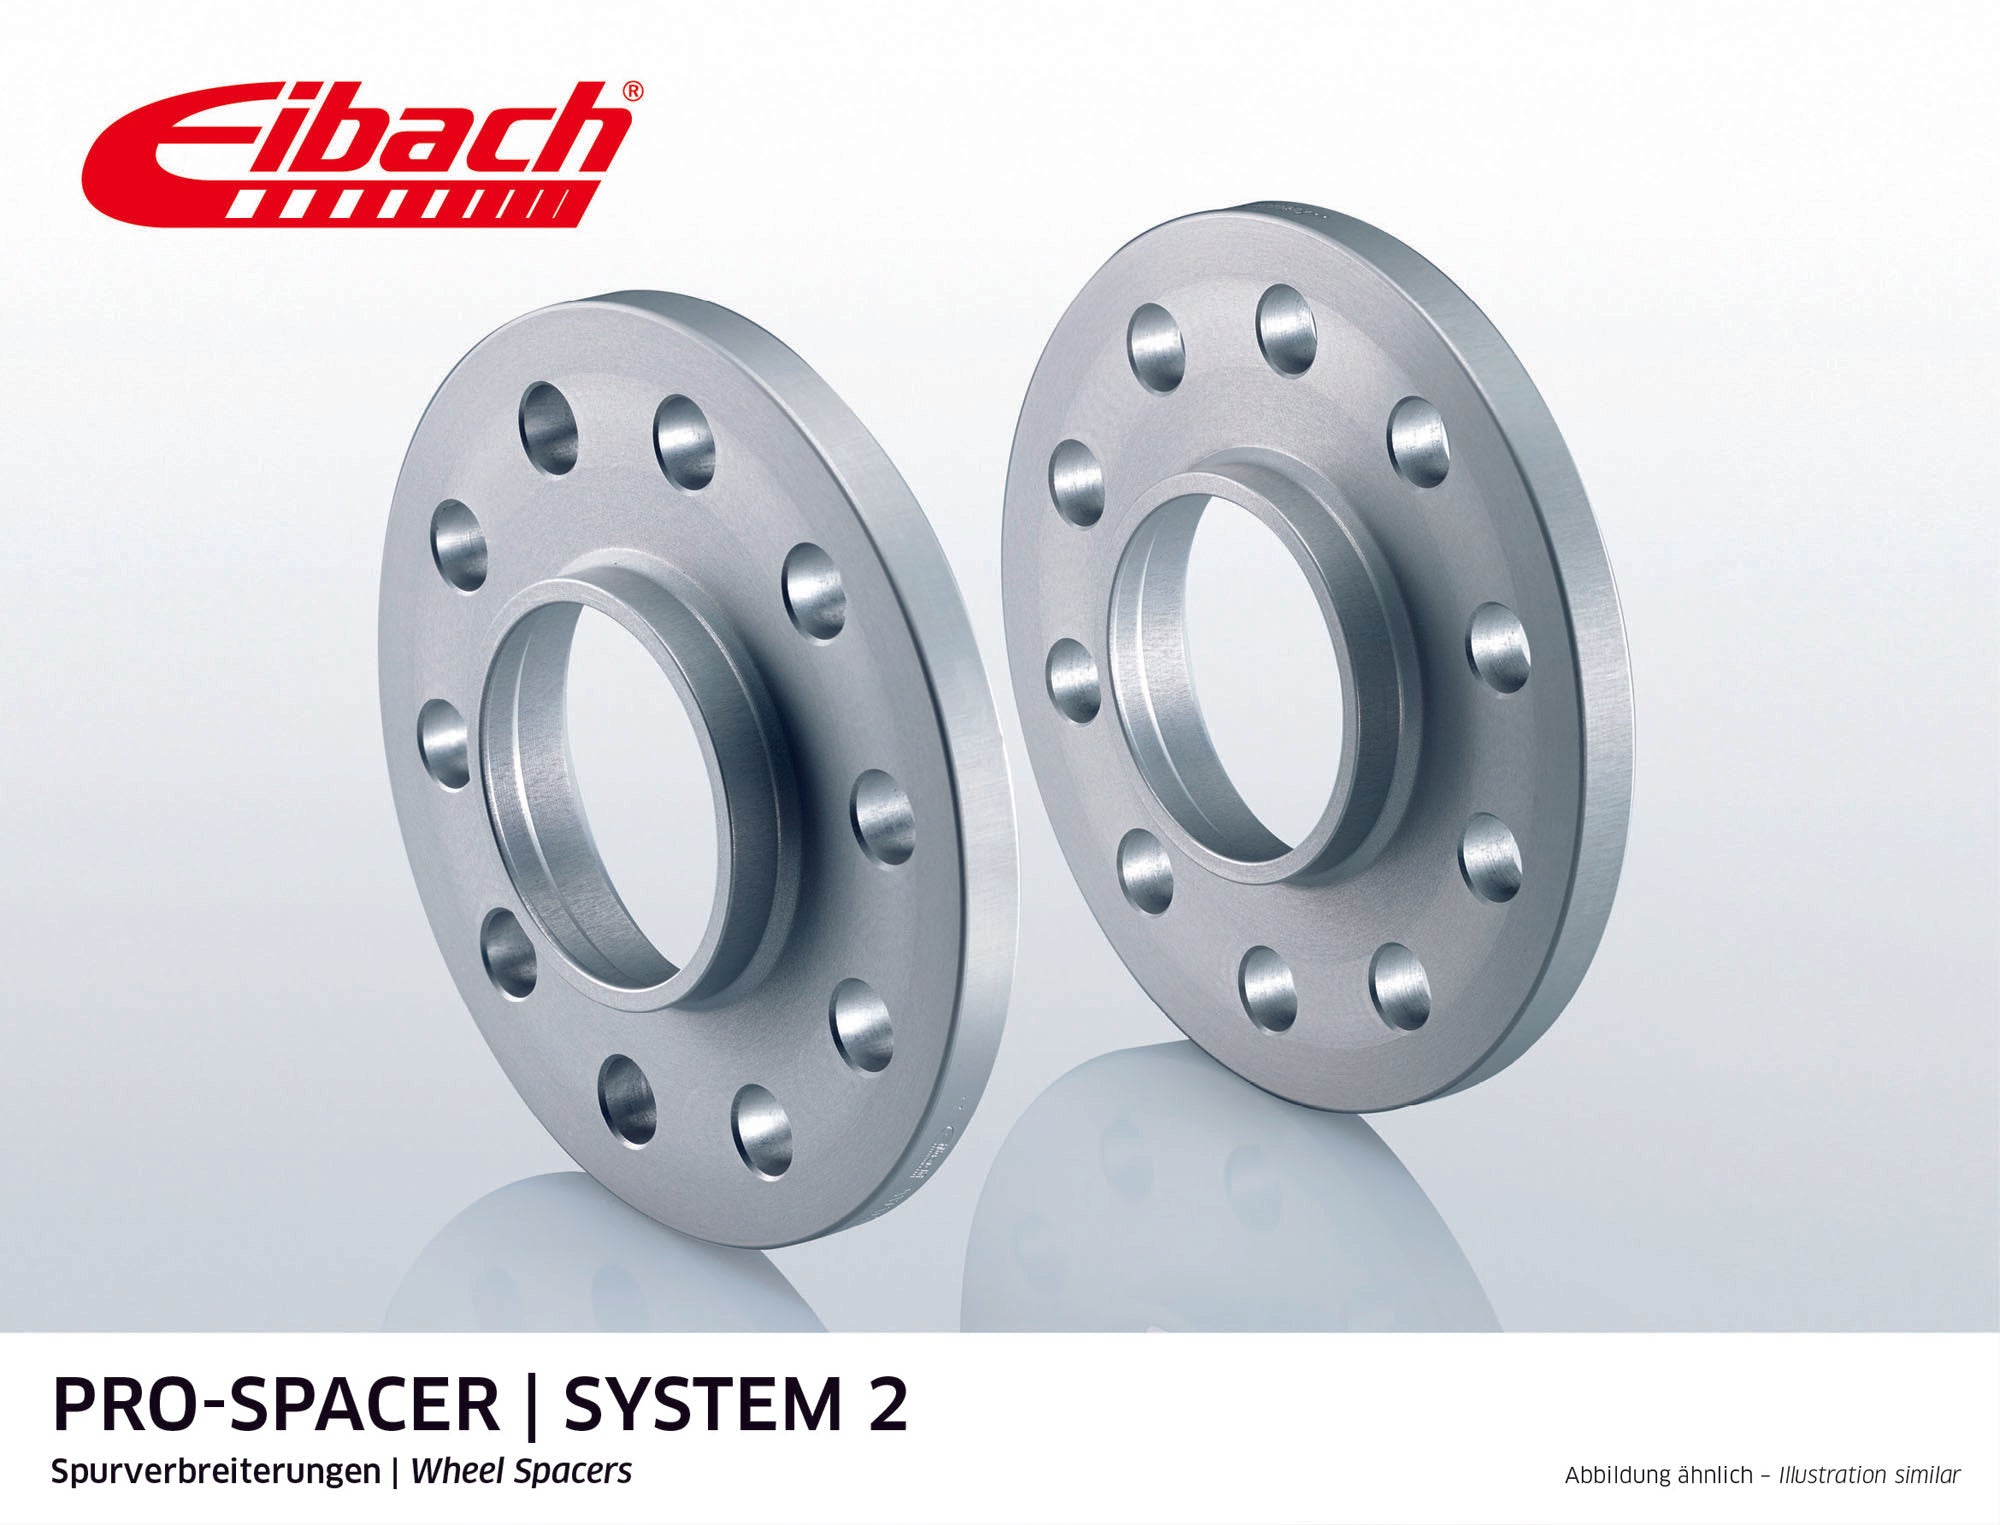 Eibach 18mm Pro-Spacer - Silver Anodized Wheel Spacer BOXSTER 2004-11 #S90-2-18-001